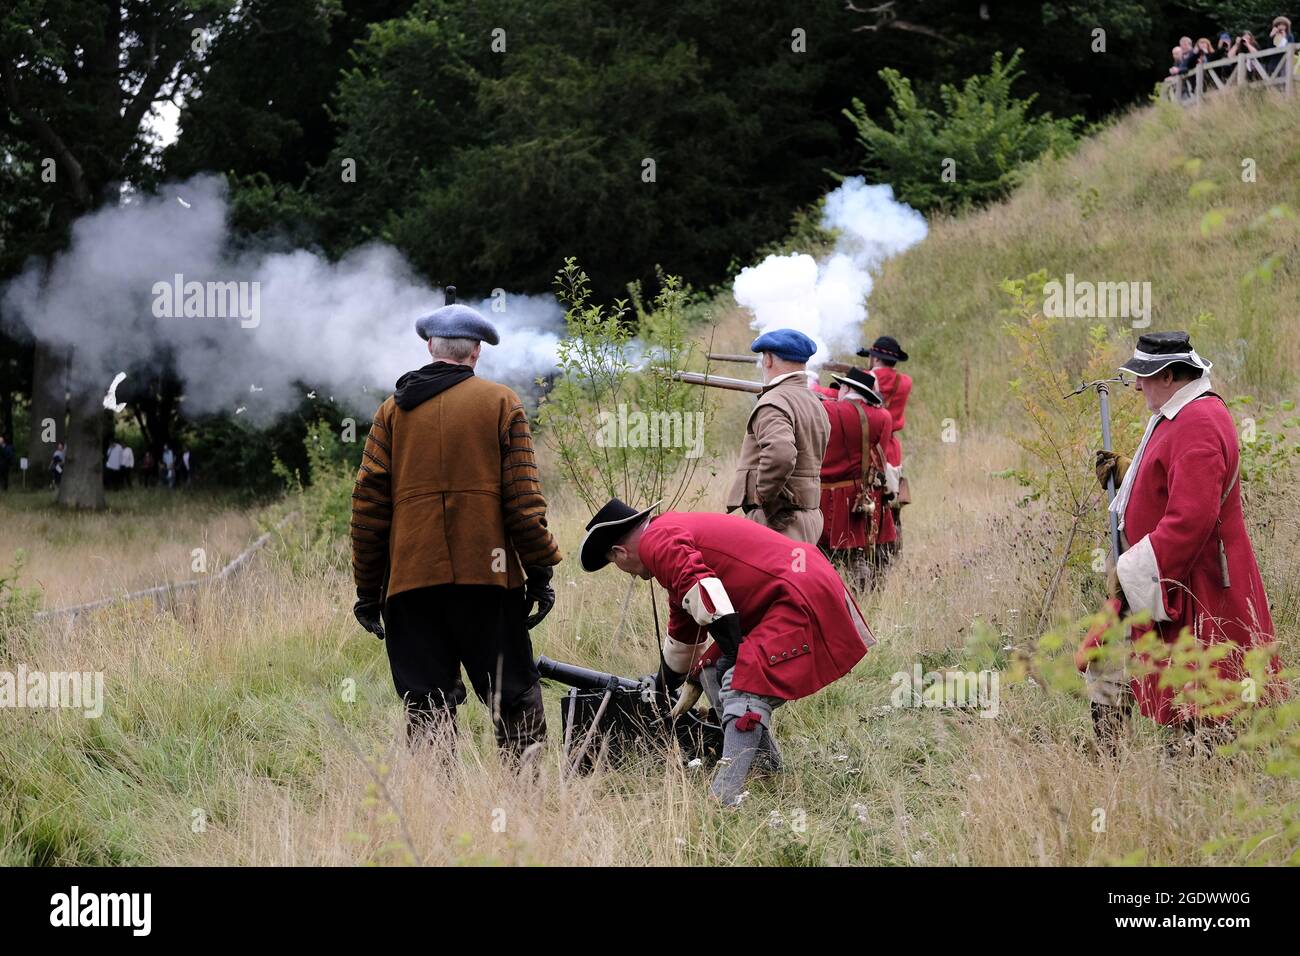 Melrose, Scotland, UK. 15th Aug, 2021. Teviotdale Steel Bonnets, demonstrate cannon and musket firing drills from the grounds below Abbotsford House. The inaugural festival, ScottFest 2021, is being held at Abbotsford, Scott's home in the Scottish Borders, over the legendary author's 250th birthday weekend, Saturday August 14th and Sunday August 15th. Credit: Rob Gray/Alamy Live News Stock Photo